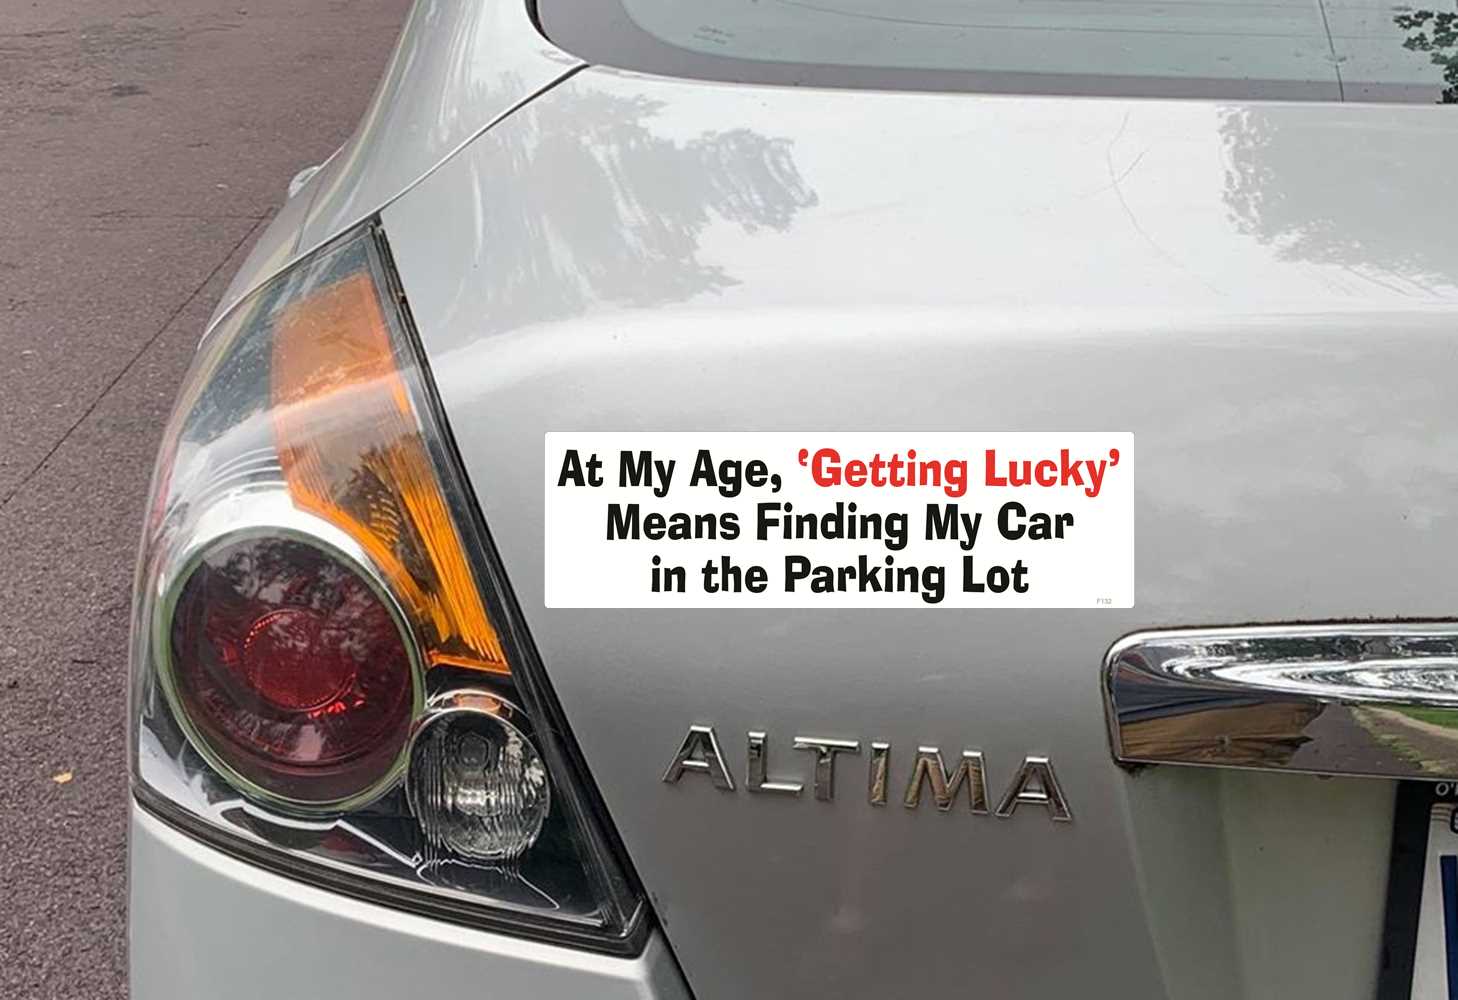 AT MY AGE ‘GETTING LUCKY’ MEANS FINDING MY CAR IN THE PARKING LOT - FUNNY BUMPER STICKER ON CAR